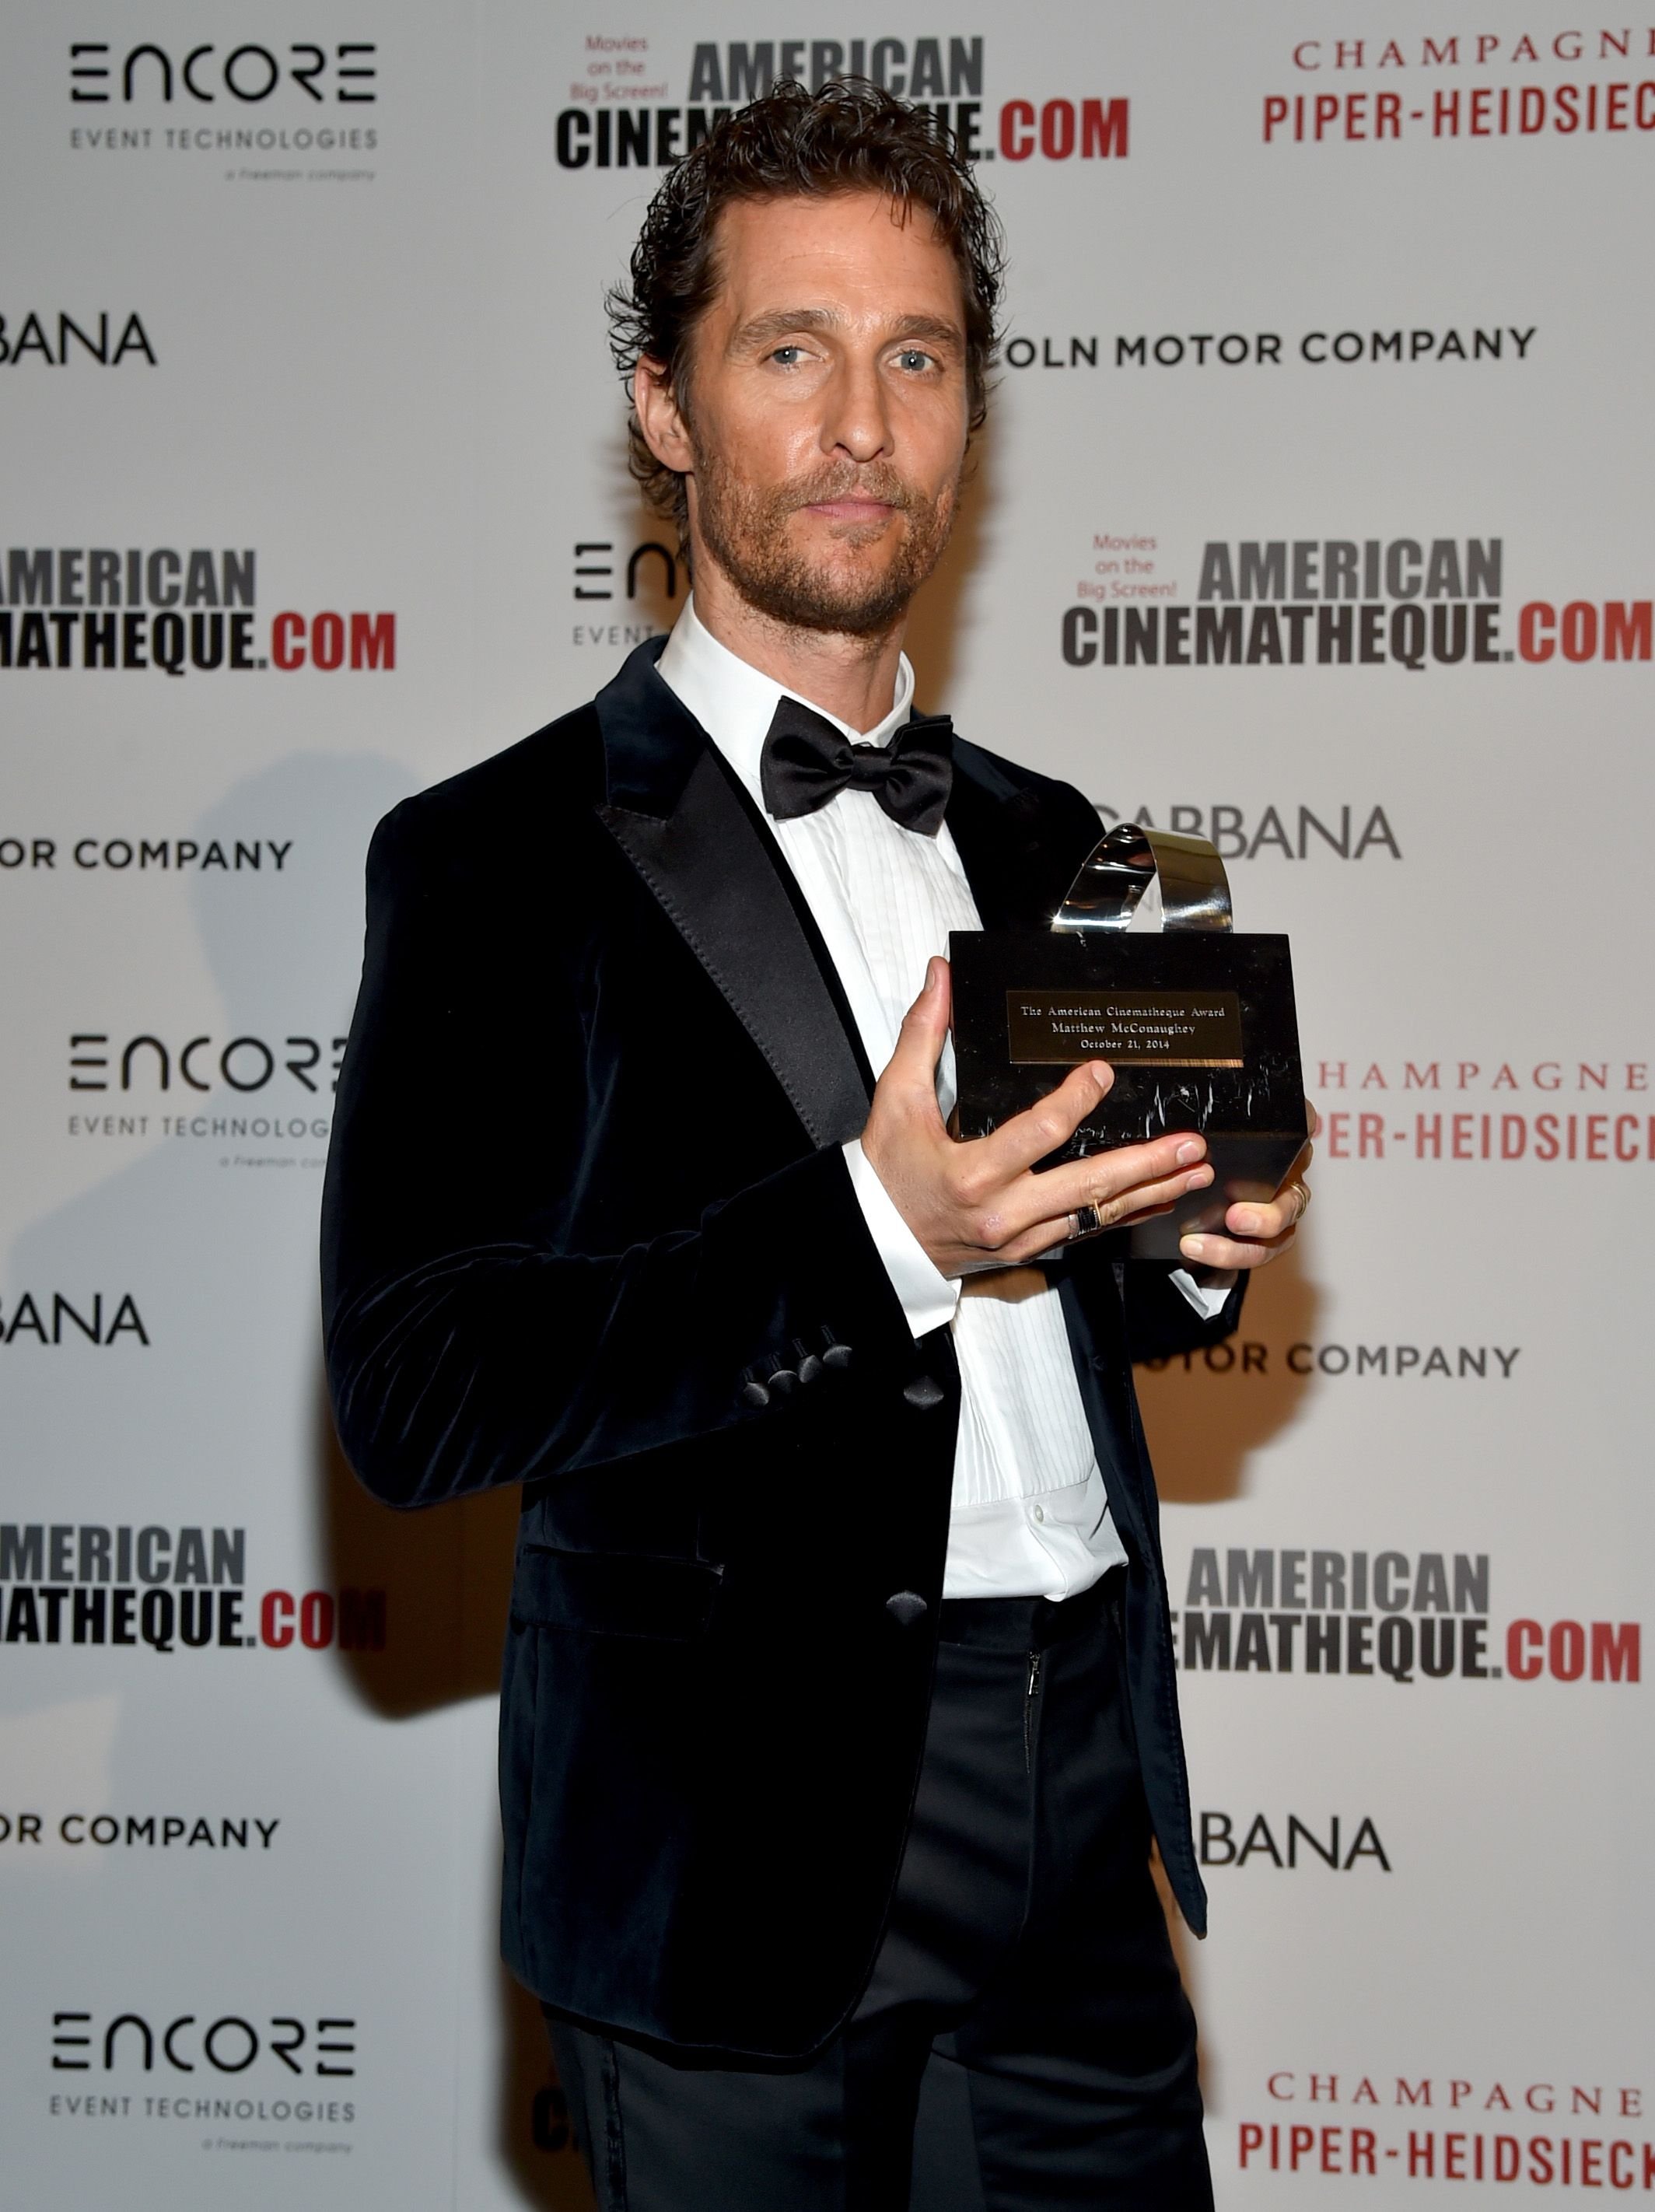 Matthew McConaughey during the 28th American Cinematheque Award at The Beverly Hilton Hotel on October 21, 2014 in Beverly Hills, California. | Source: Getty Images